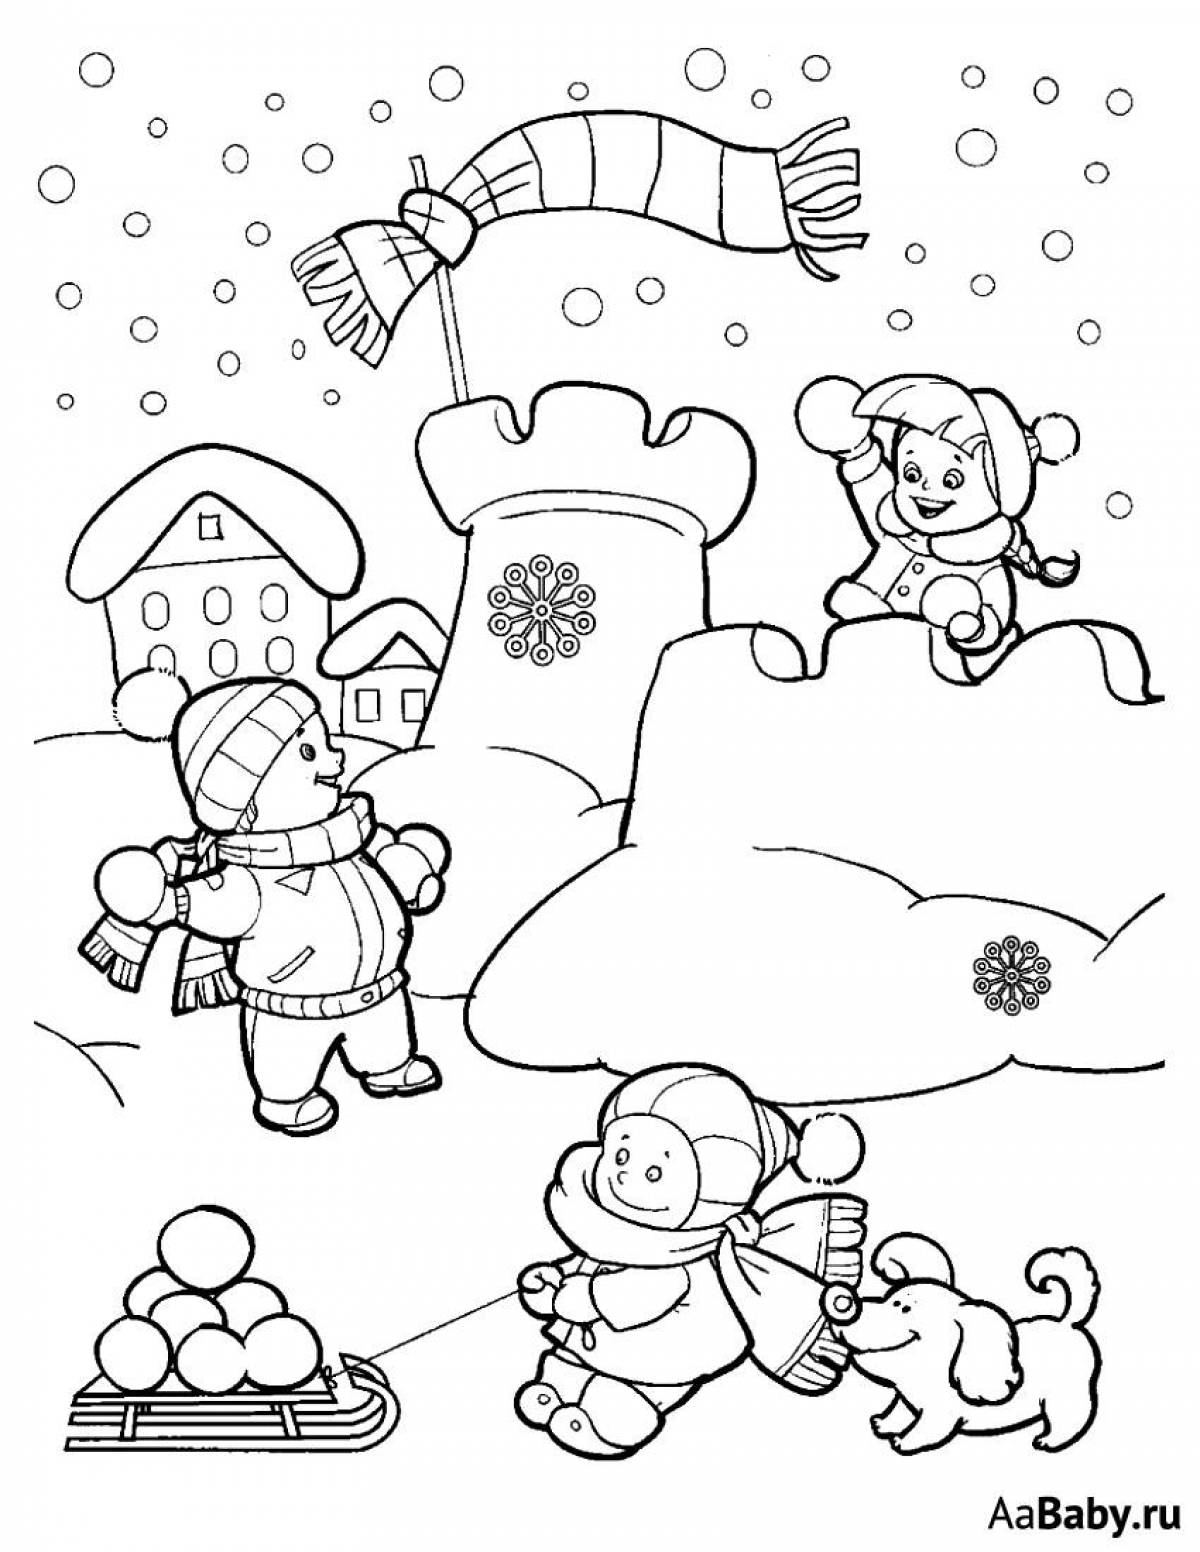 Animated winter coloring book for children 4-5 years old